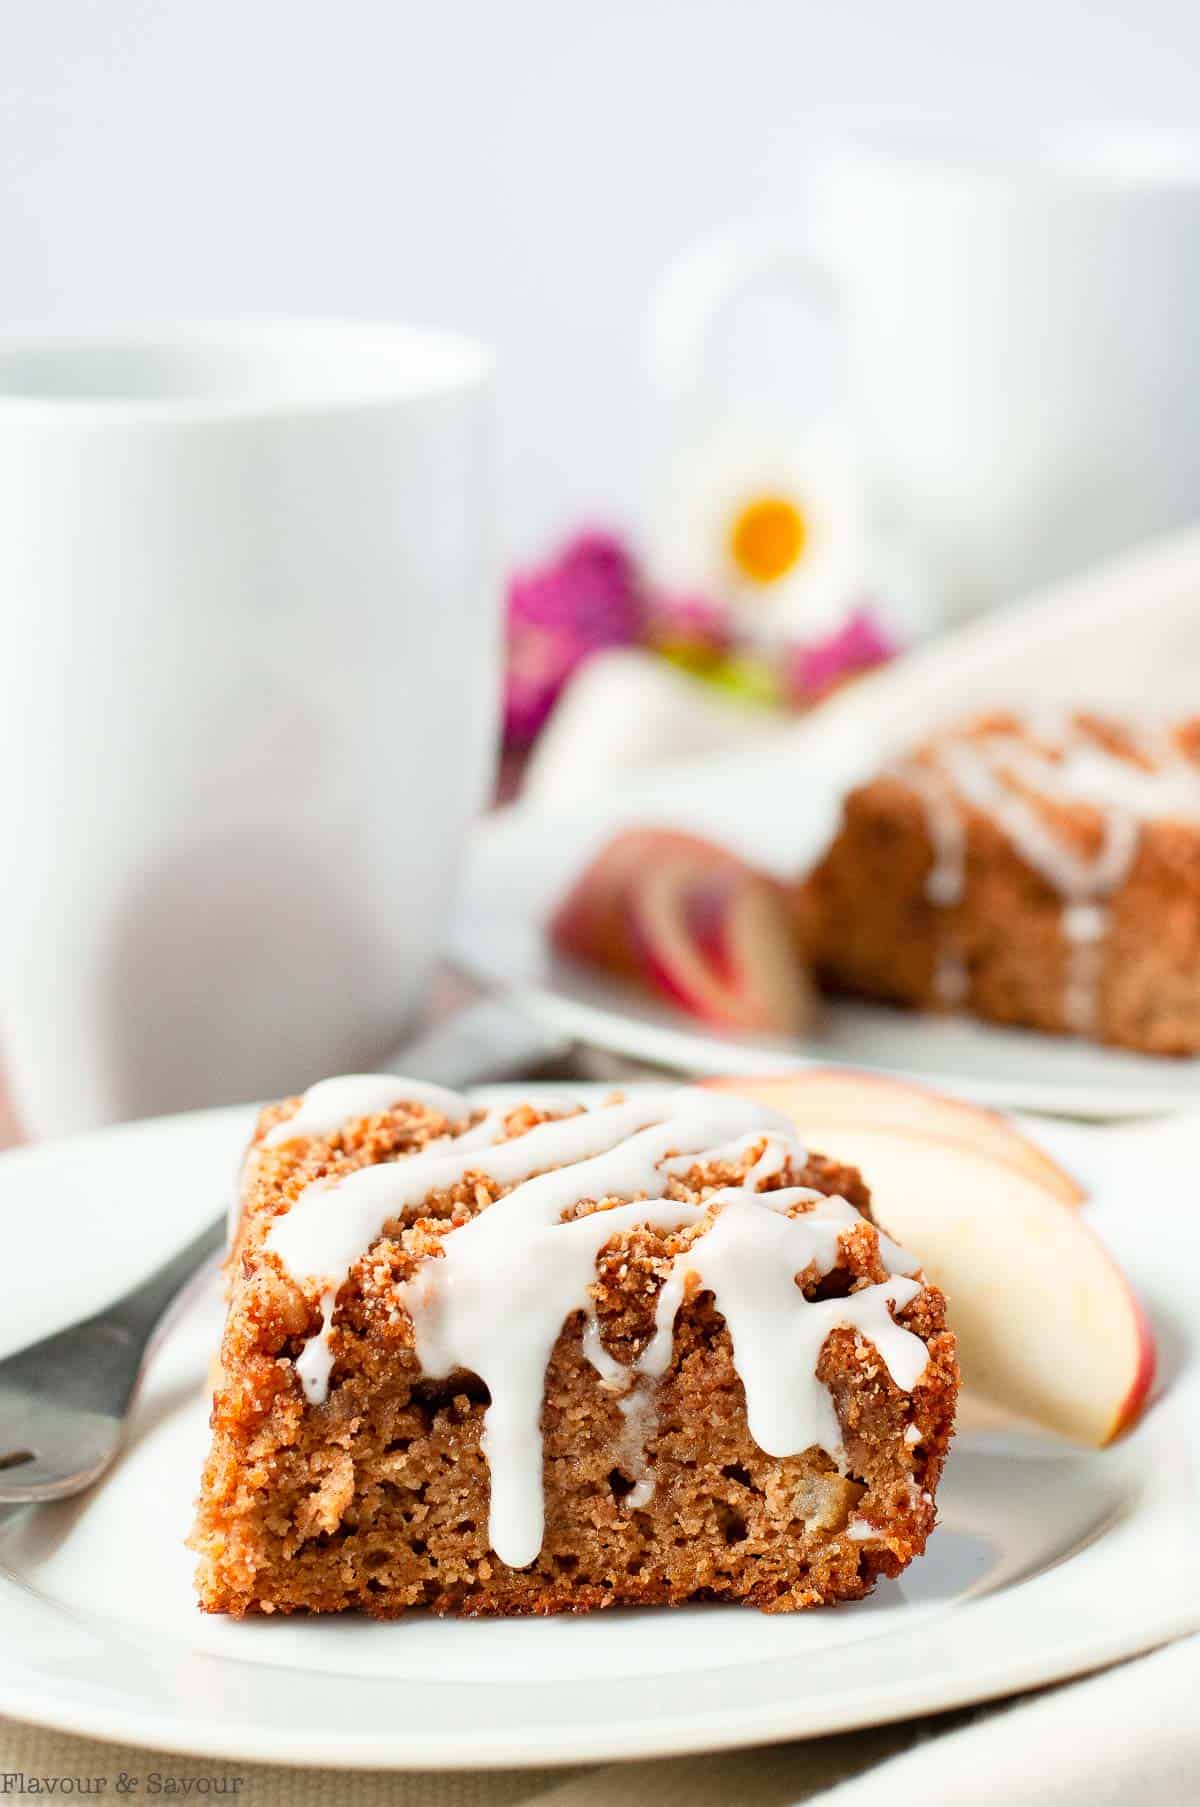 Gluten-free apple cinnamon coffee cake with a lemon drizzle on a plate with apple slices.